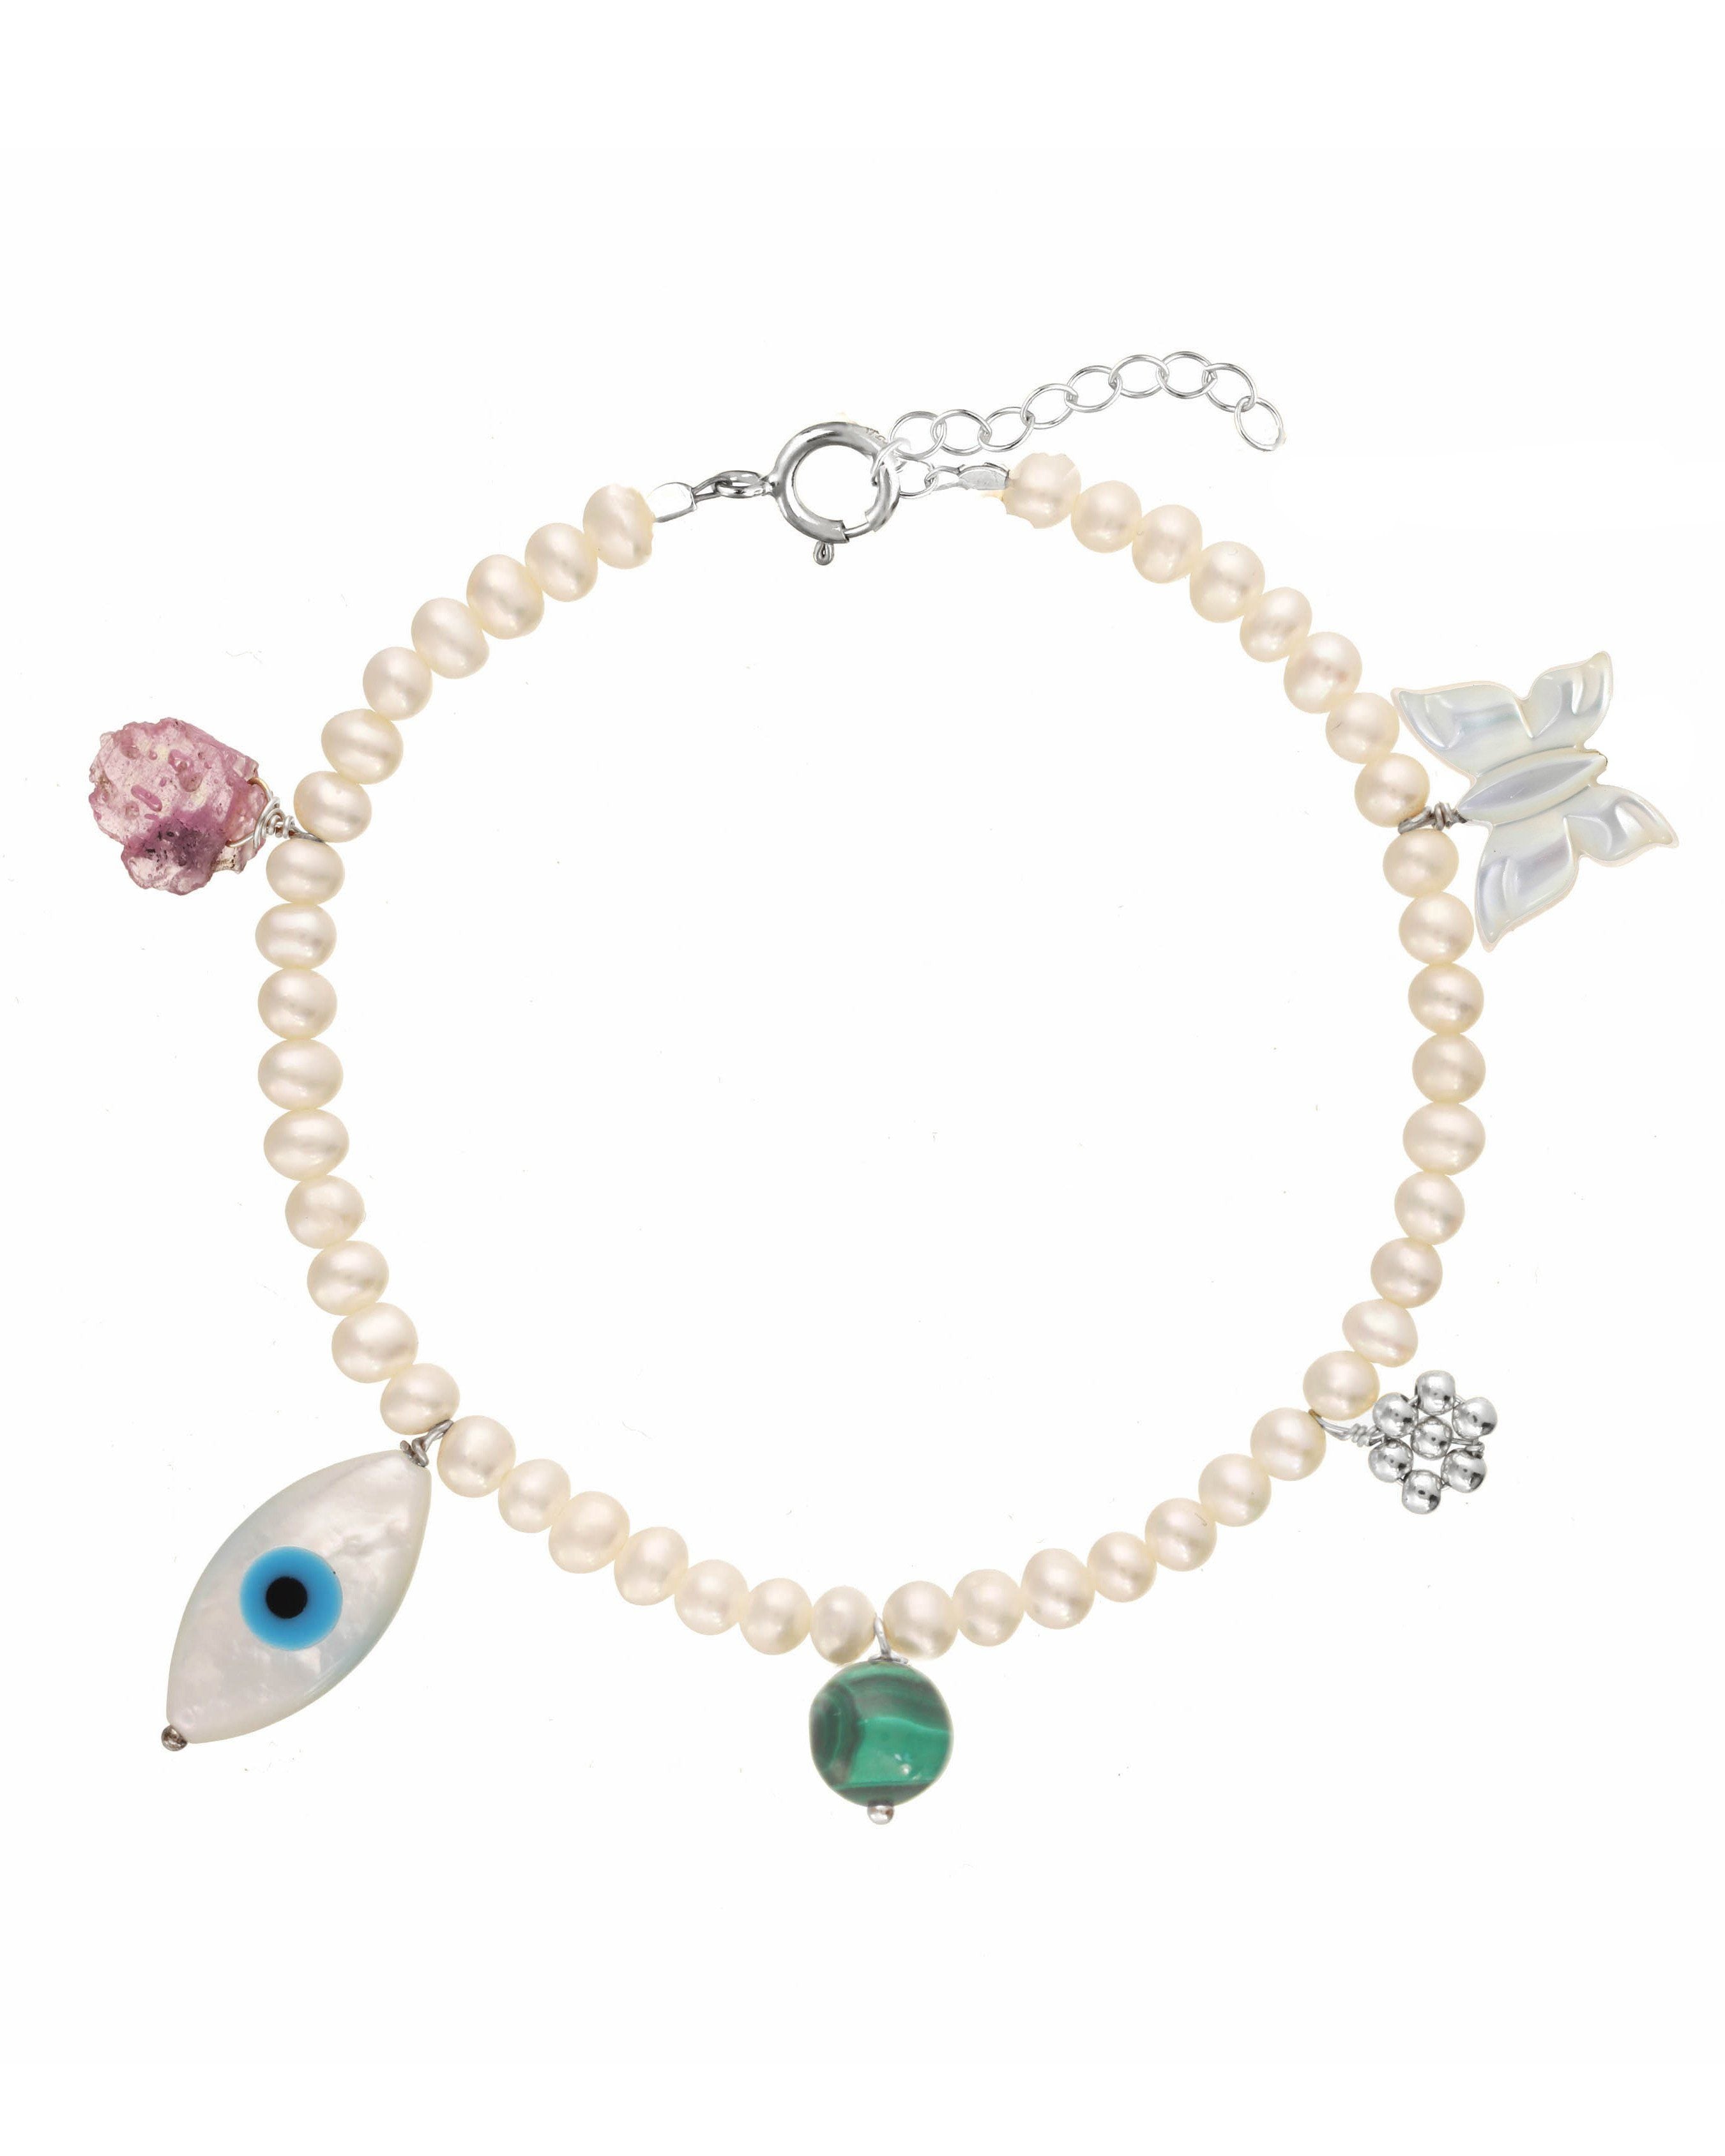 Rylan Bracelet by KOZAKH. A 6 to 7 inch adjustable length, 3mm freshwater pearl strand bracelet, crafted in Sterling Silver, featuring a Pink Tourmaline slice, a Mother of Pearl butterfly charm, a round Malachite gemstone, and Mother of Pearl evil eye charm. 